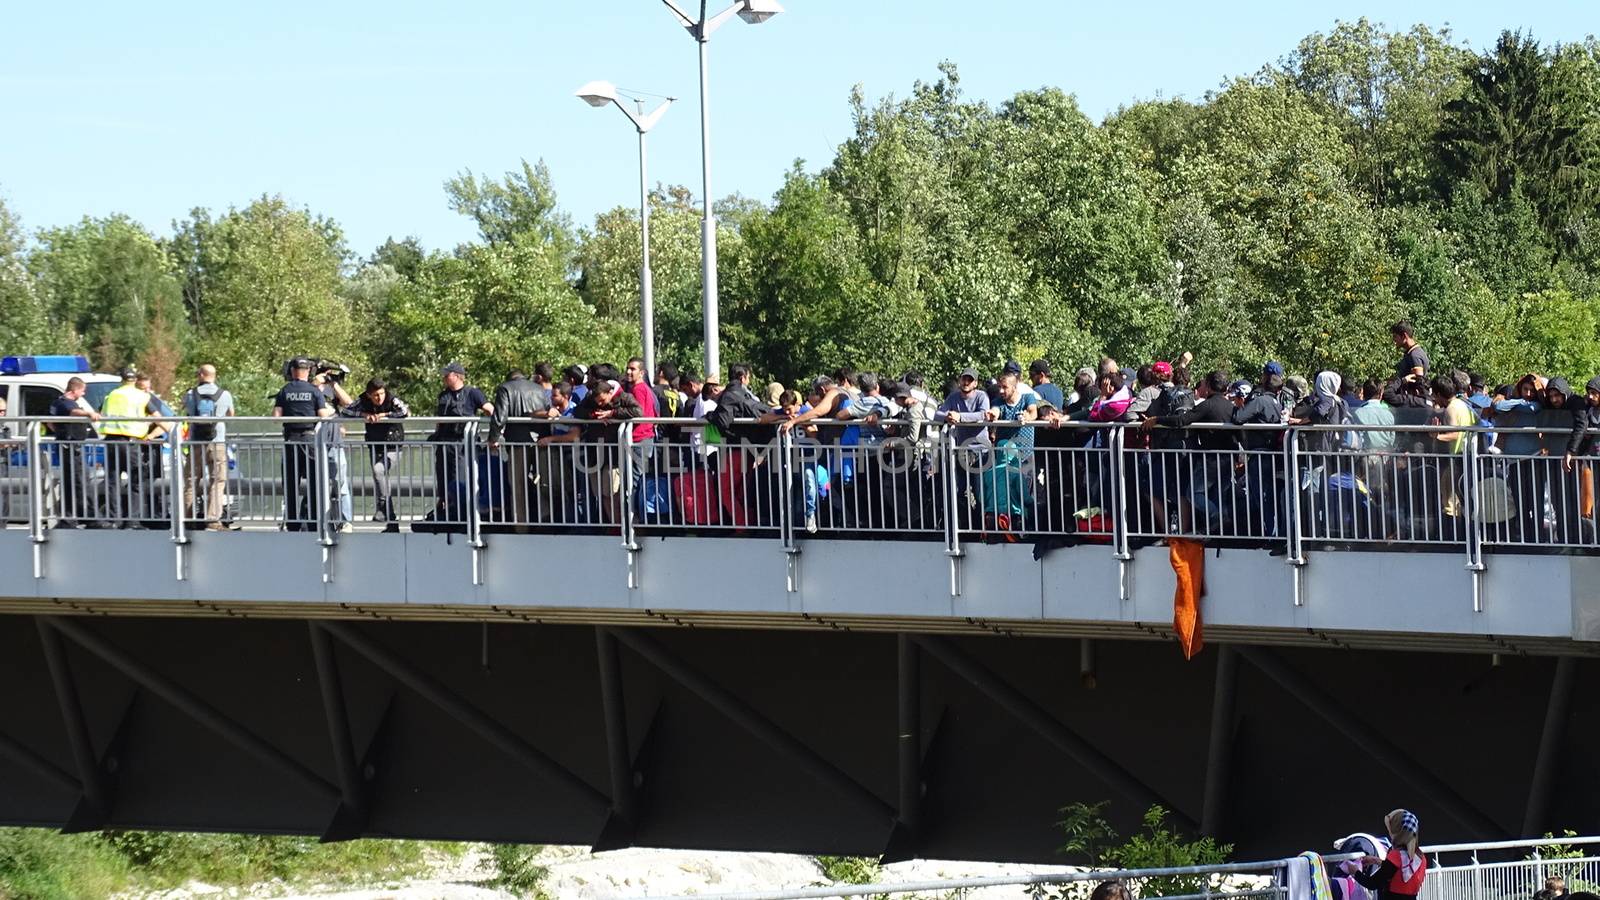 GERMANY, Freilassing: Refugees wait at the bridge on Austrai/Germany border, in Freilassing, Bavaria, on the German side of the Germany-Austria border, September 17, 2015.